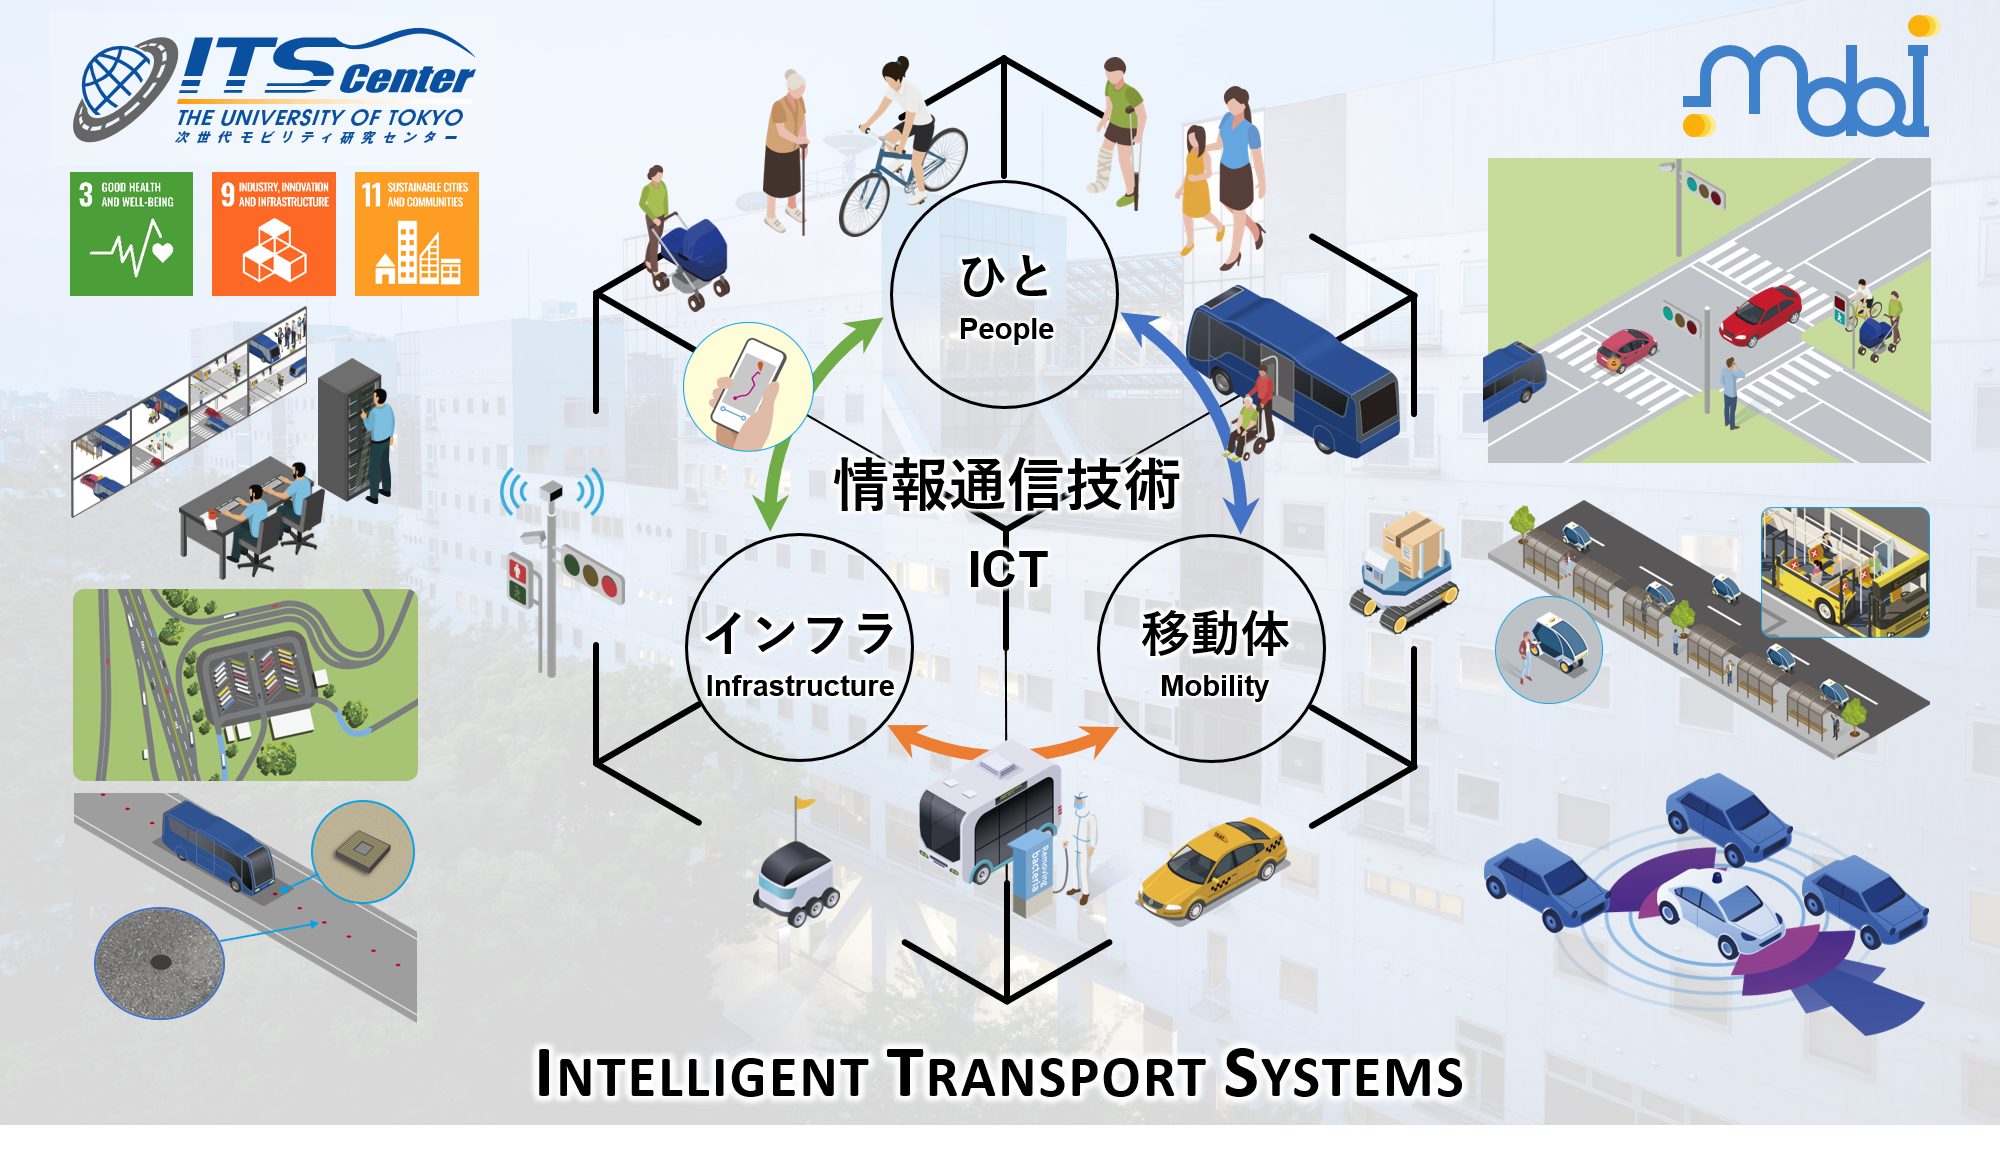 Innovations in mobility created by connecting humans, mobility, and infrastructure through the application of information and communication technology.